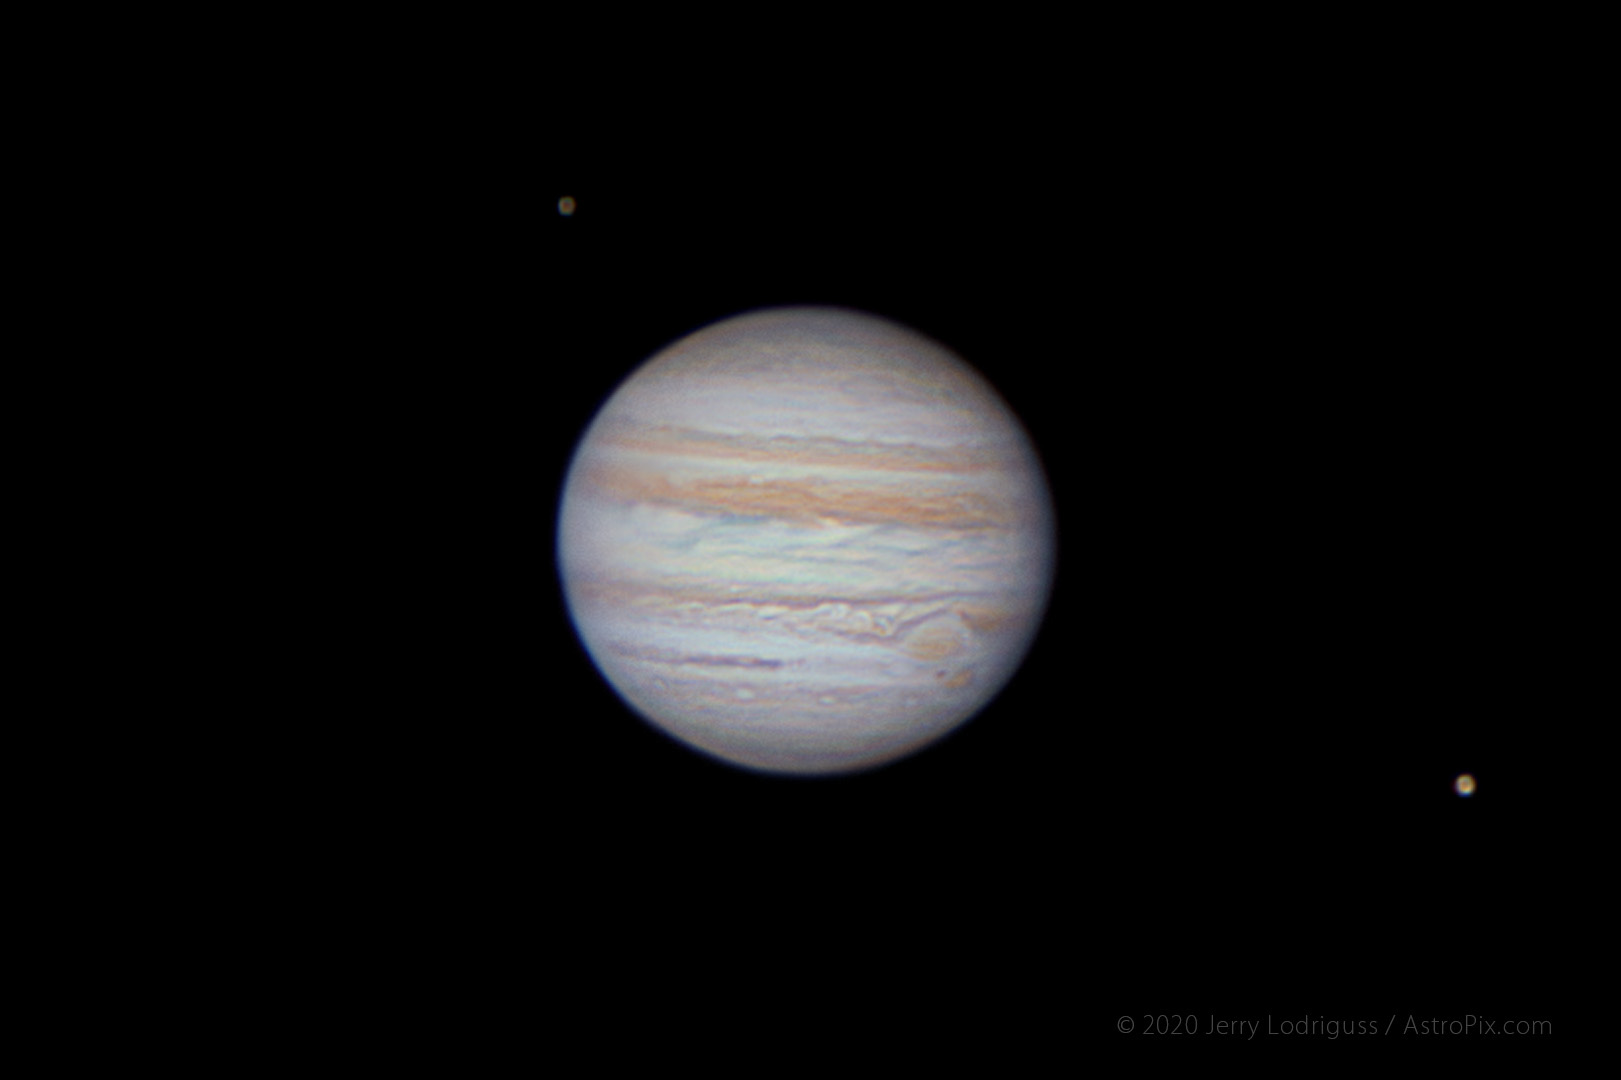 Jupiter and the Great Red Spot, and its moons Callisto and Ganymede, are seen here.